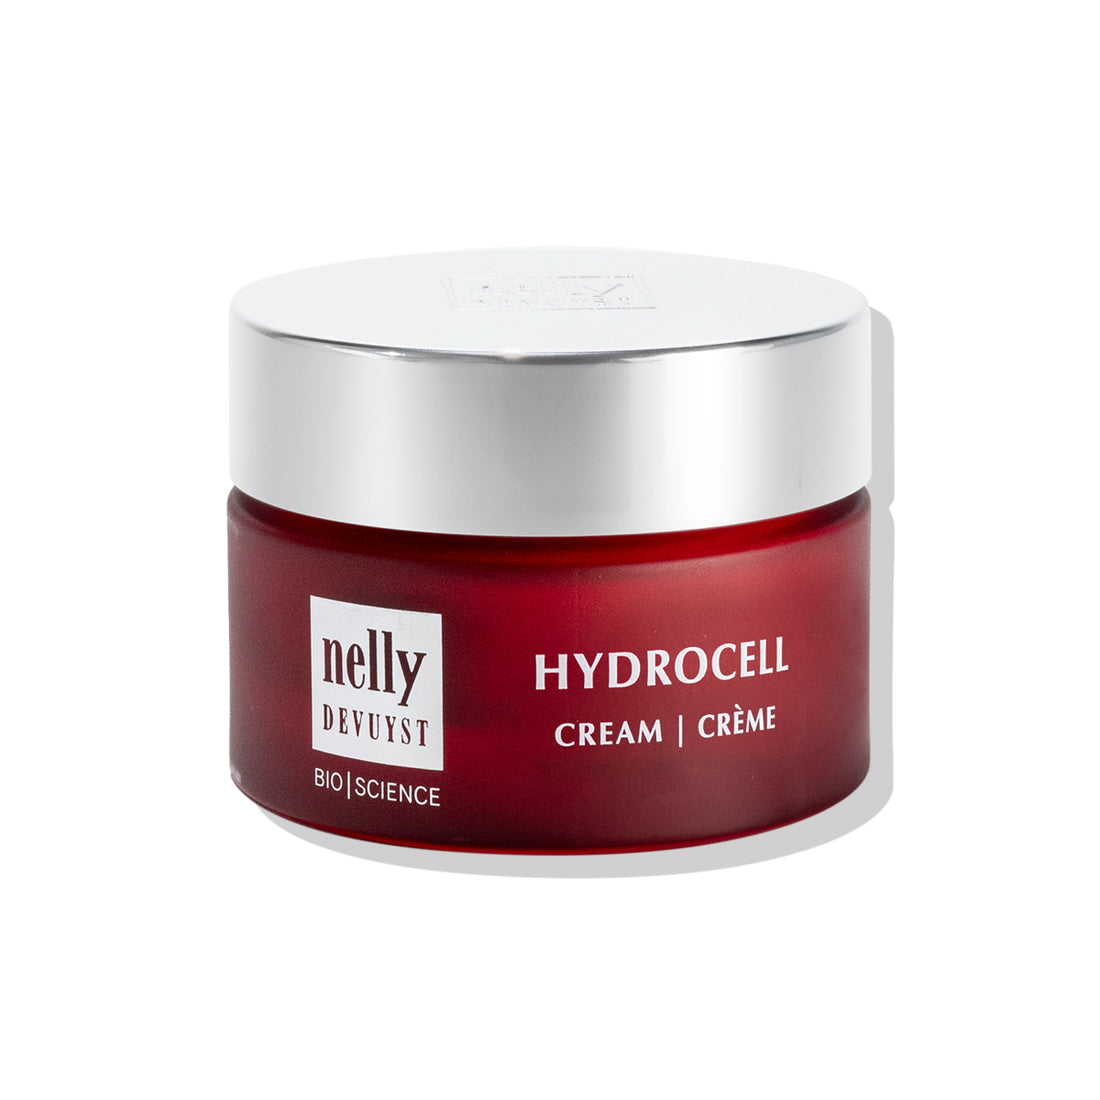 Crème Hydrocell Bioscience - Nelly Devuyst